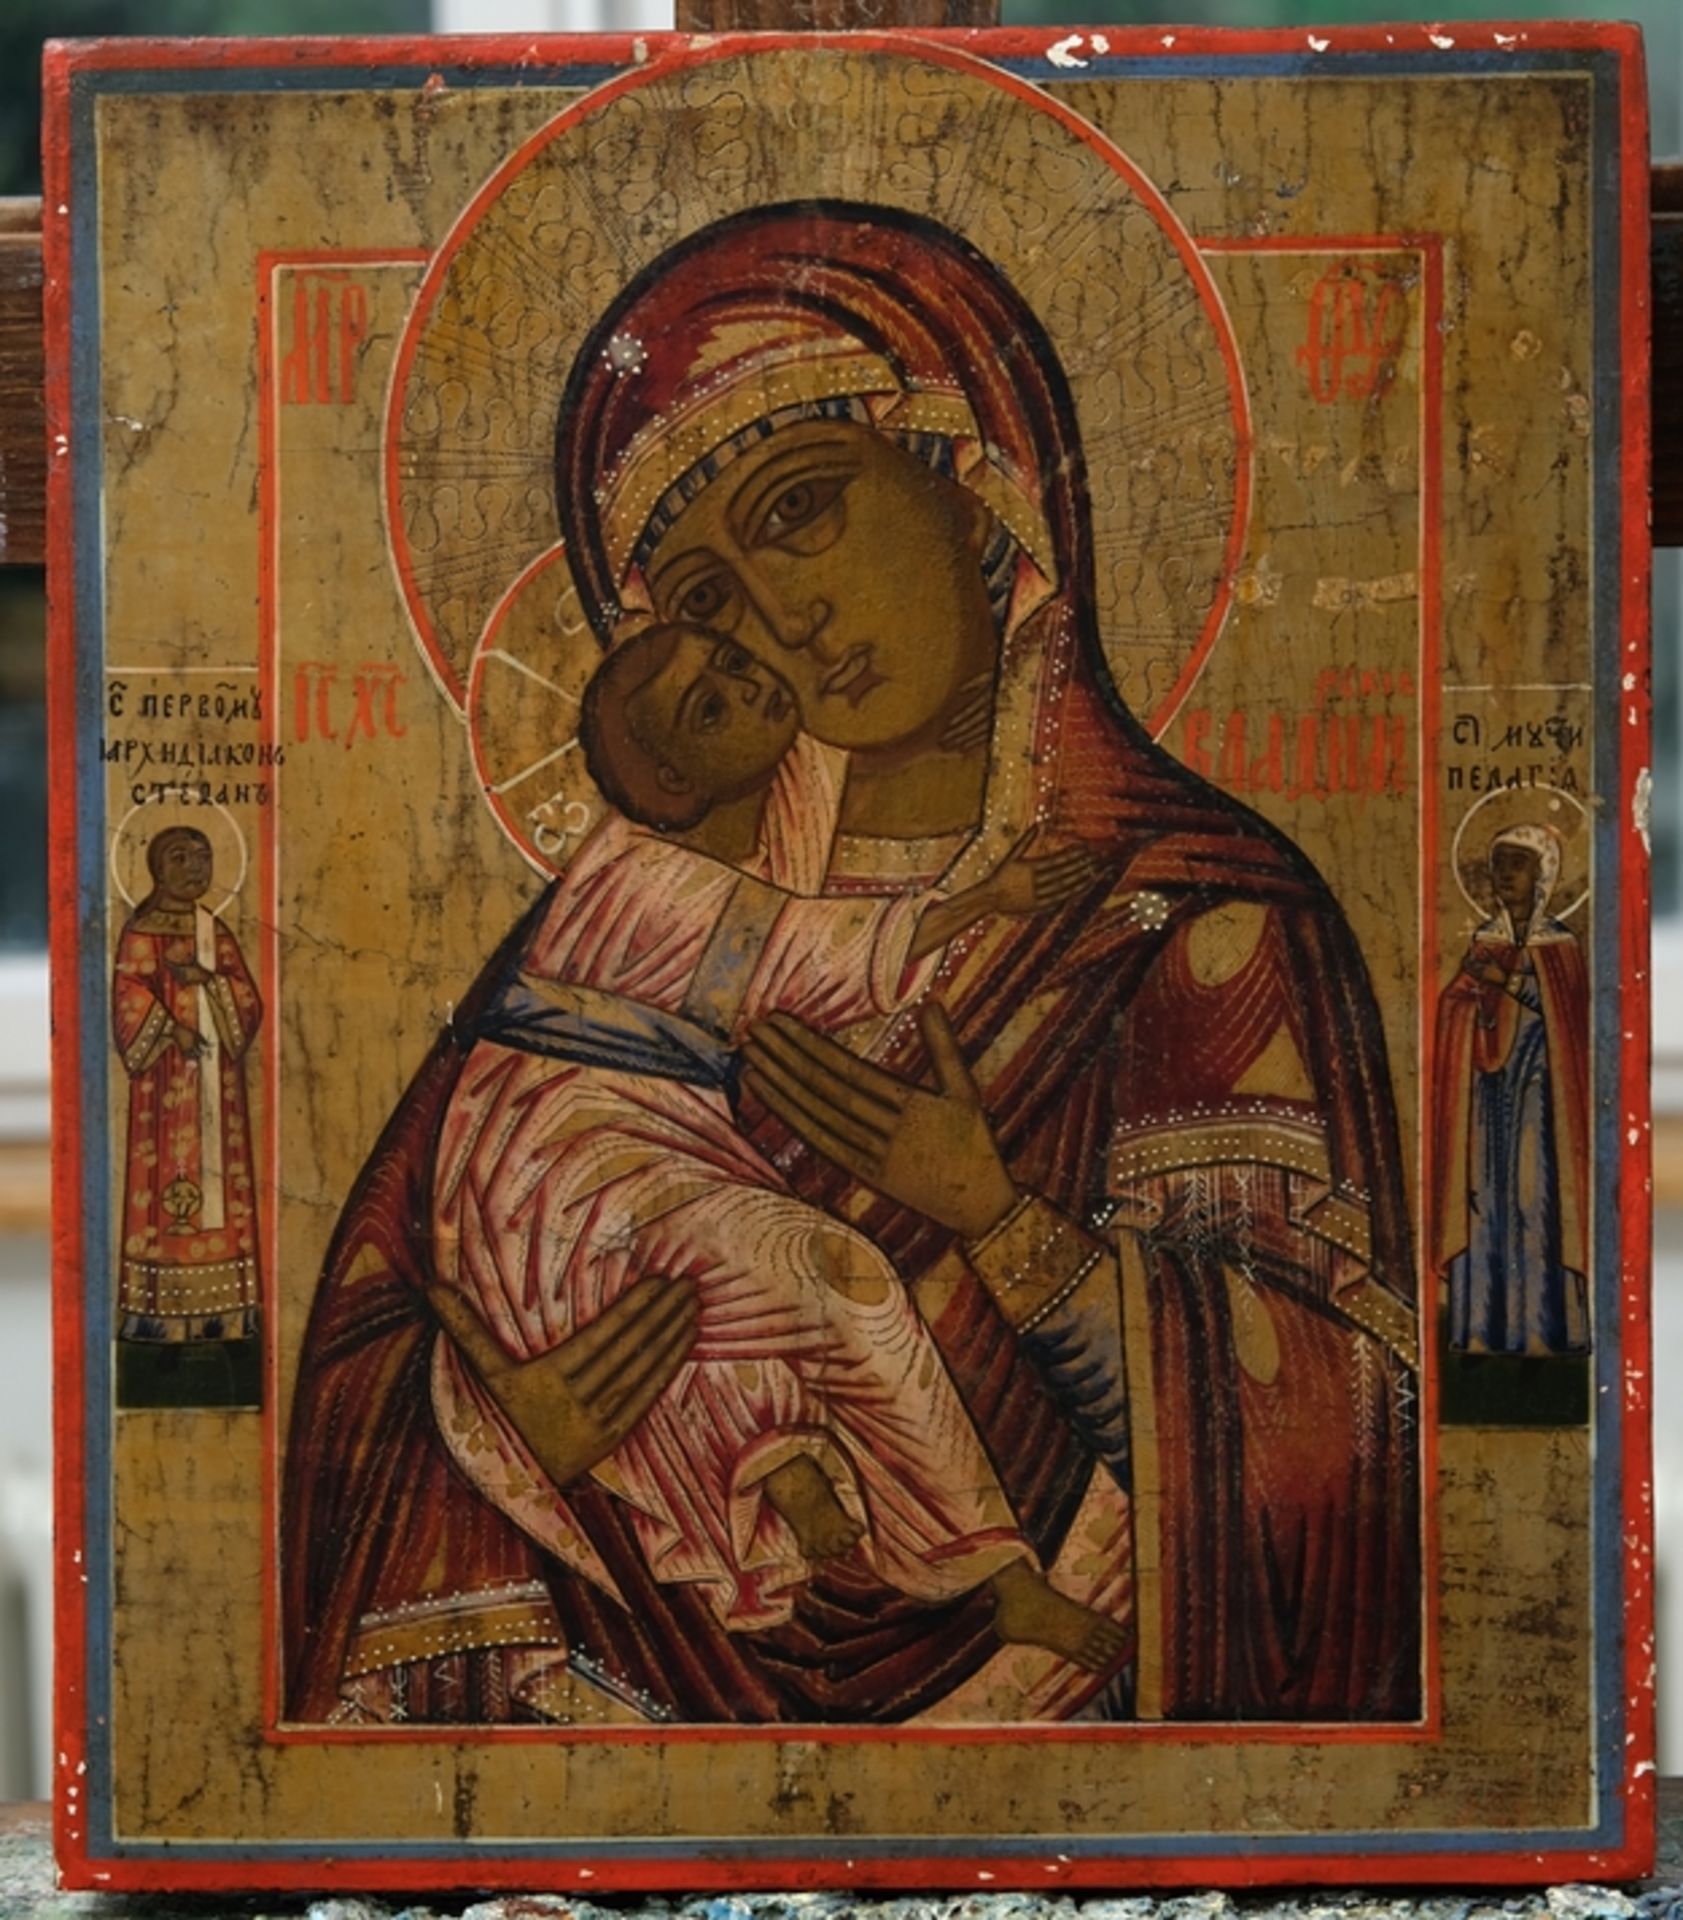 Russian icon, copy of the "Mother of God of Vladimir", early 19th century, tempera on limewood. The